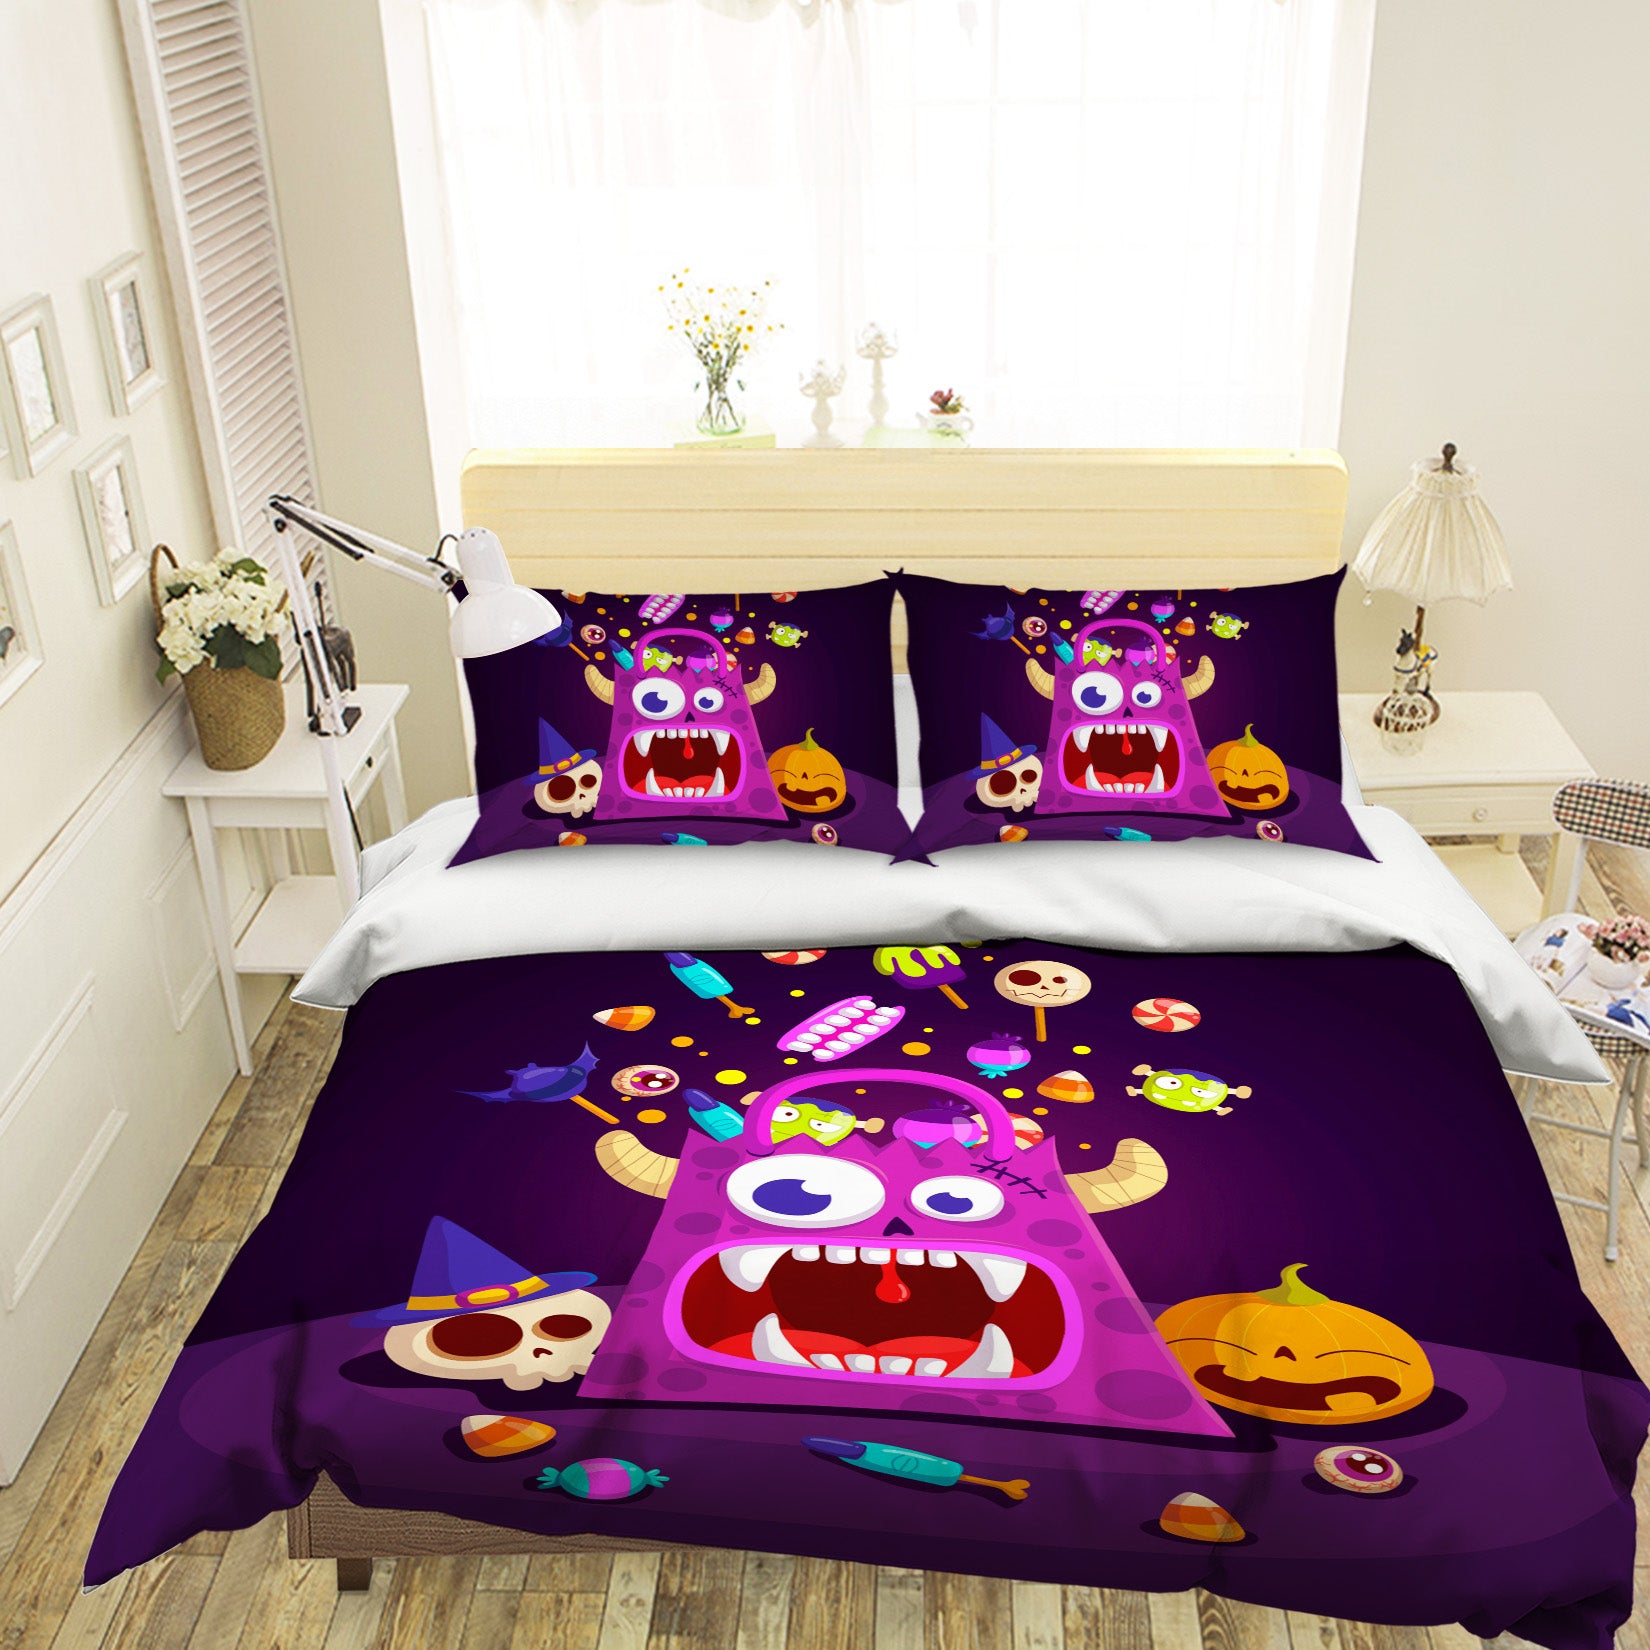 3D Monster Shopping Bag 1200 Halloween Bed Pillowcases Quilt Quiet Covers AJ Creativity Home 